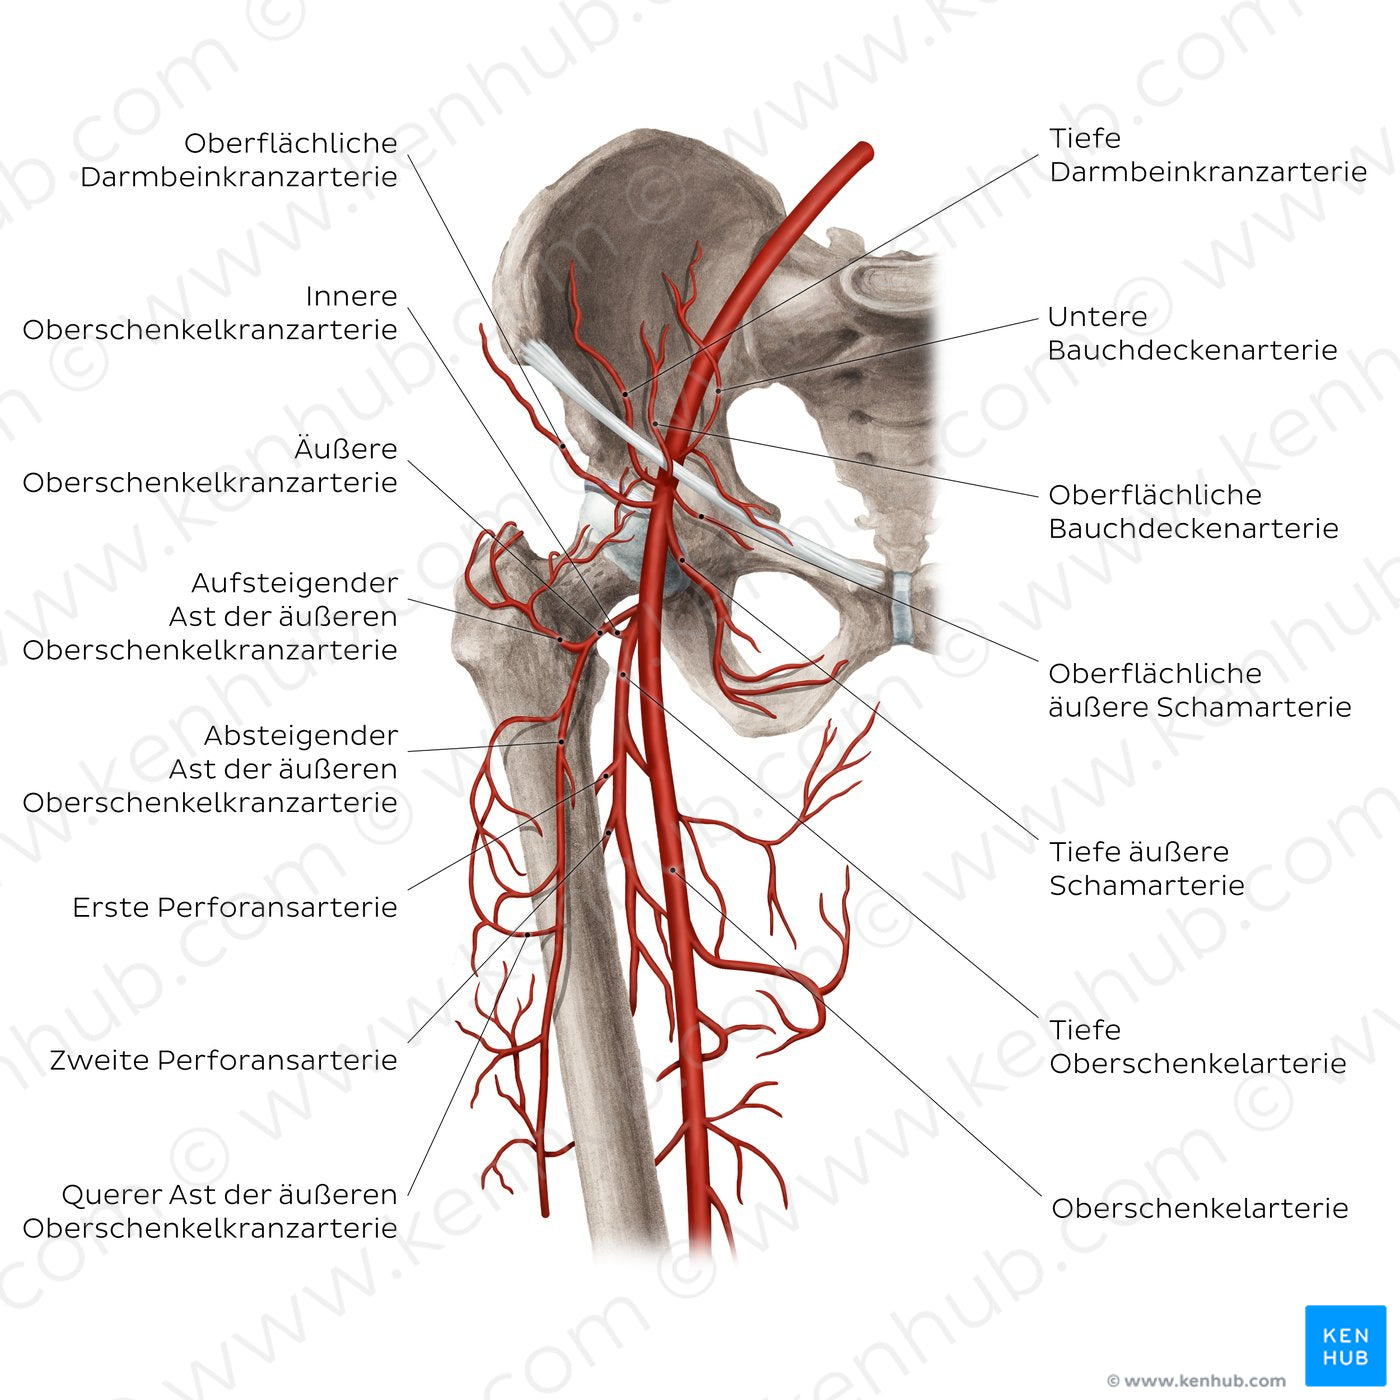 Femoral artery and its branches (German)